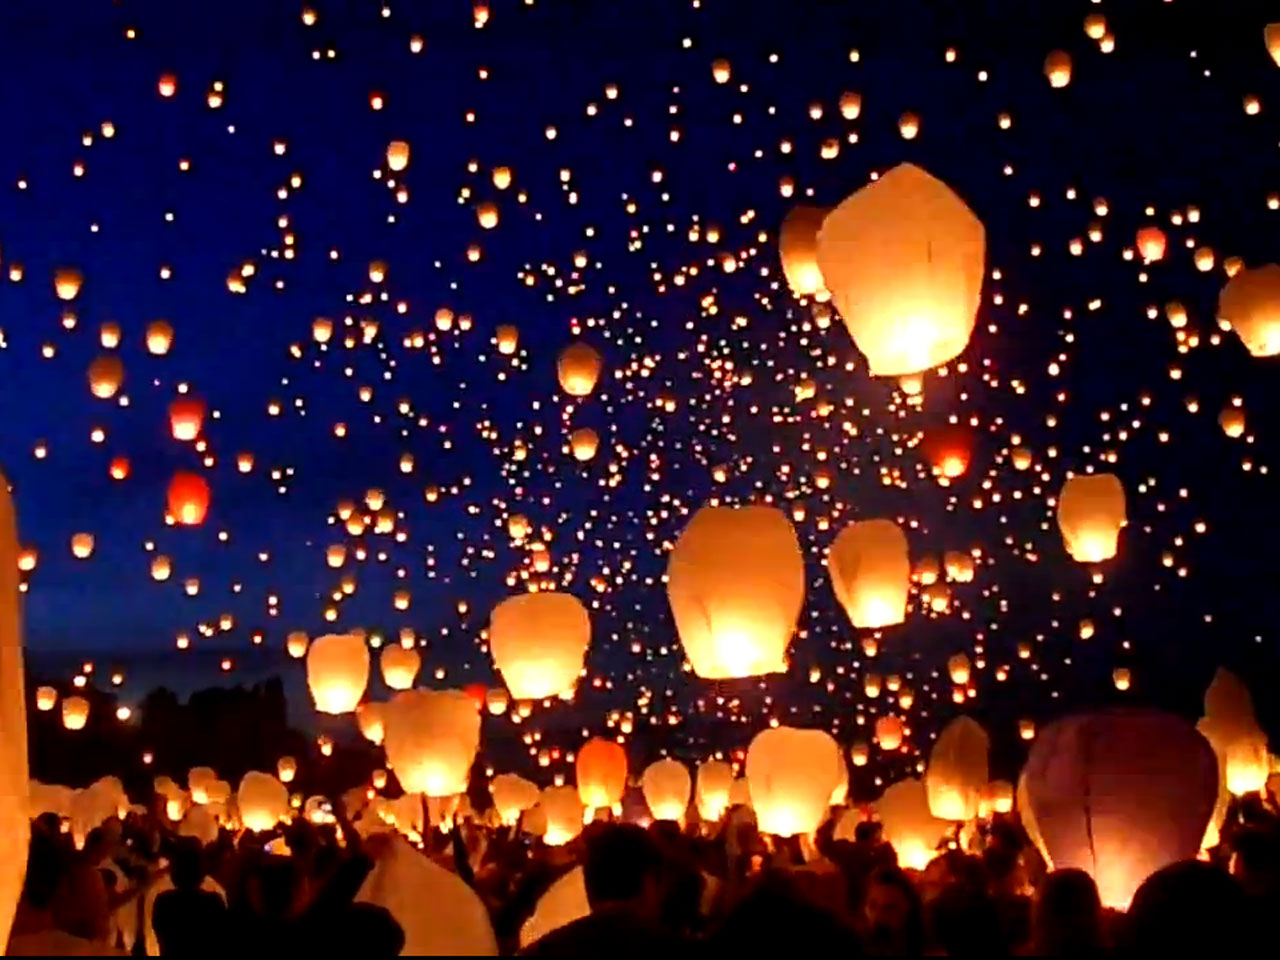 Thousands of lanterns  fill the night  sky in Poland CBS News